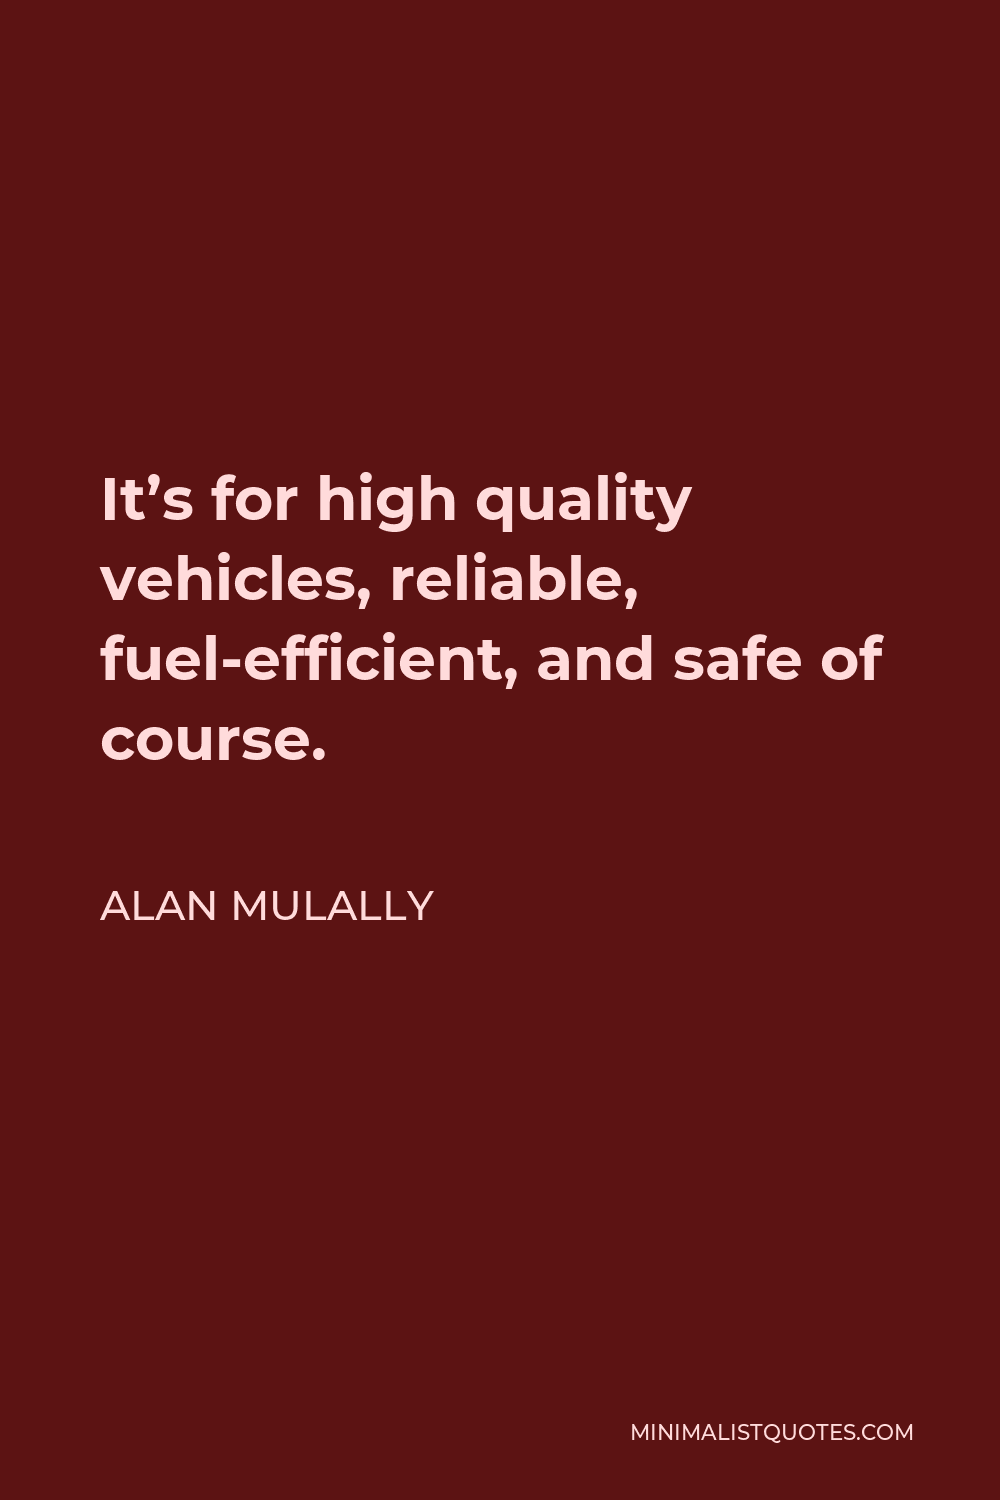 Alan Mulally Quote - It’s for high quality vehicles, reliable, fuel-efficient, and safe of course.